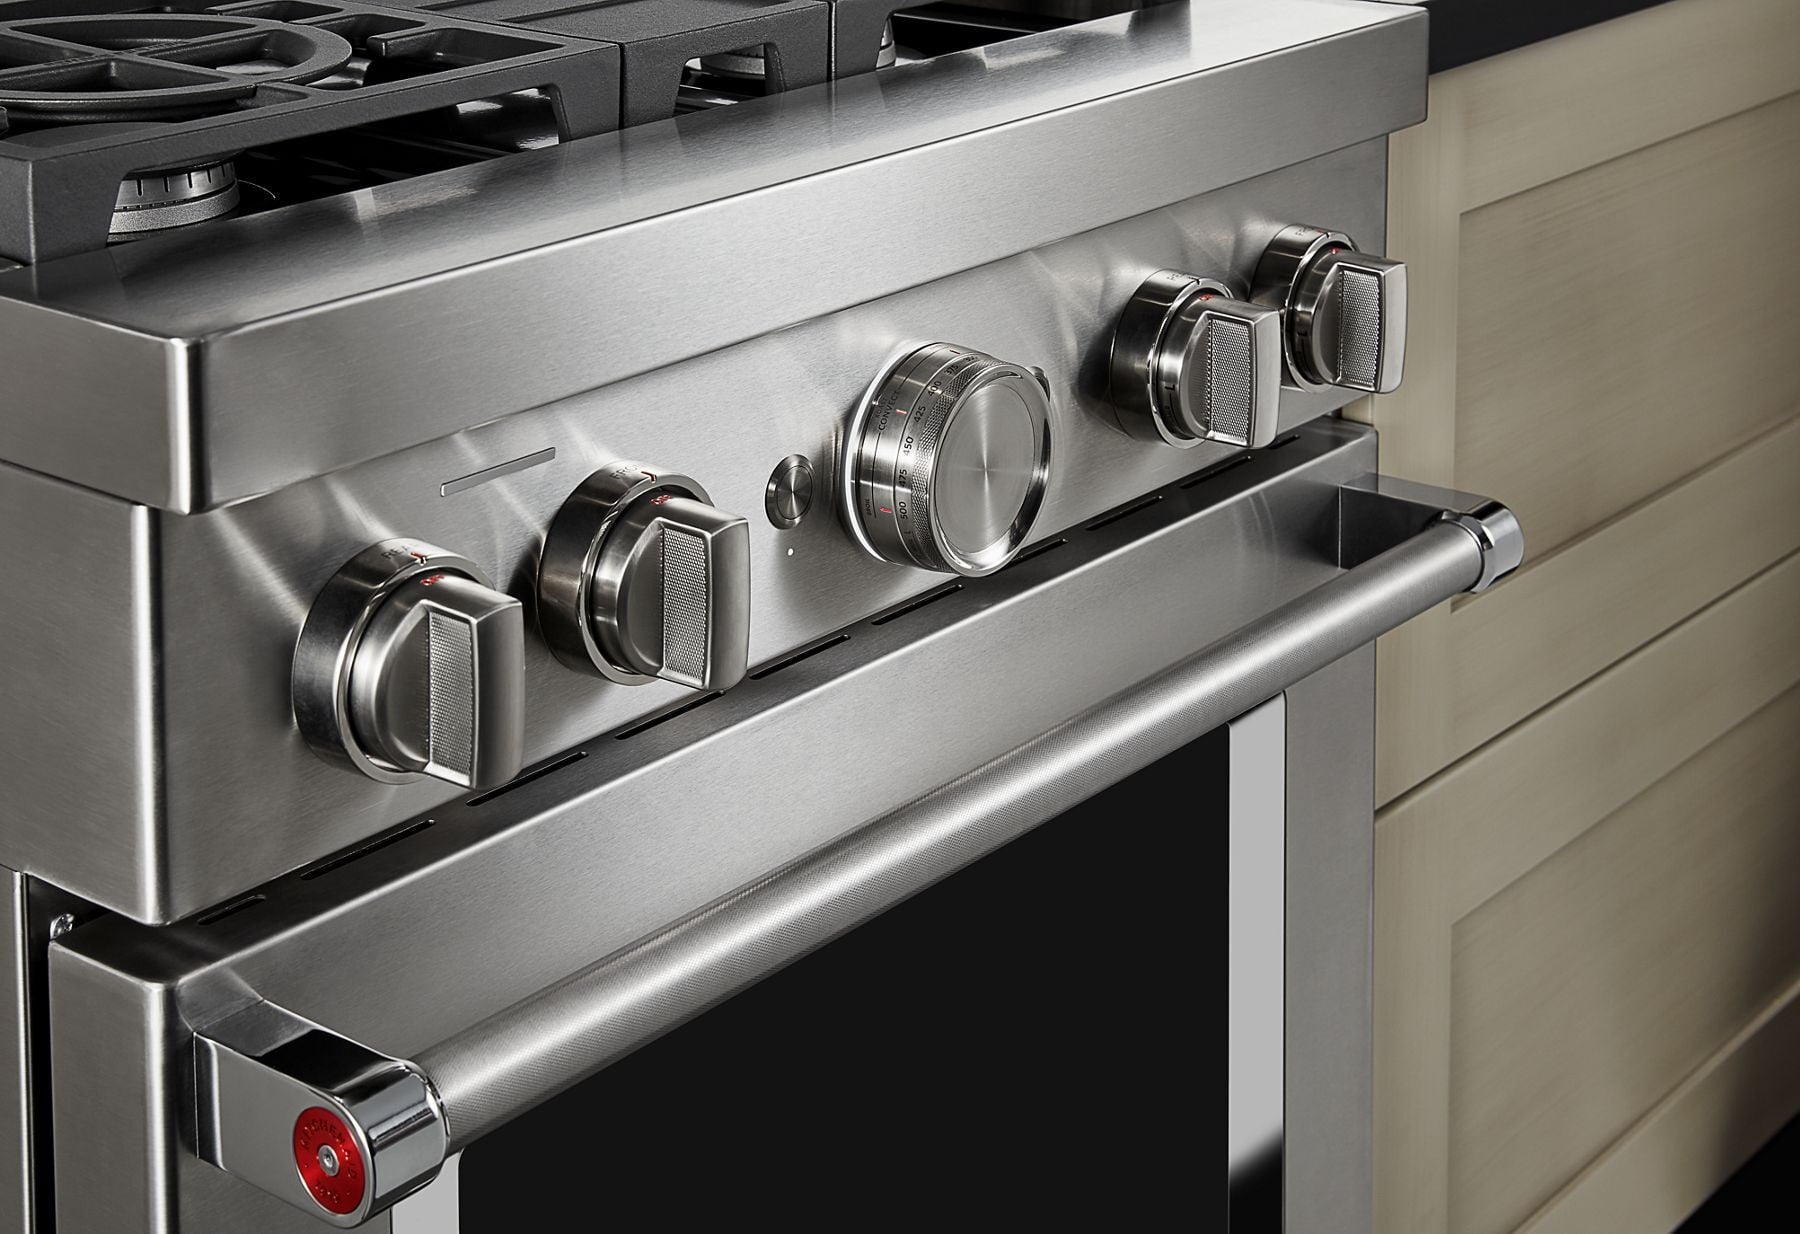 Kitchenaid KFGC500JSS Kitchenaid® 30'' Smart Commercial-Style Gas Range With 4 Burners - Heritage Stainless Steel